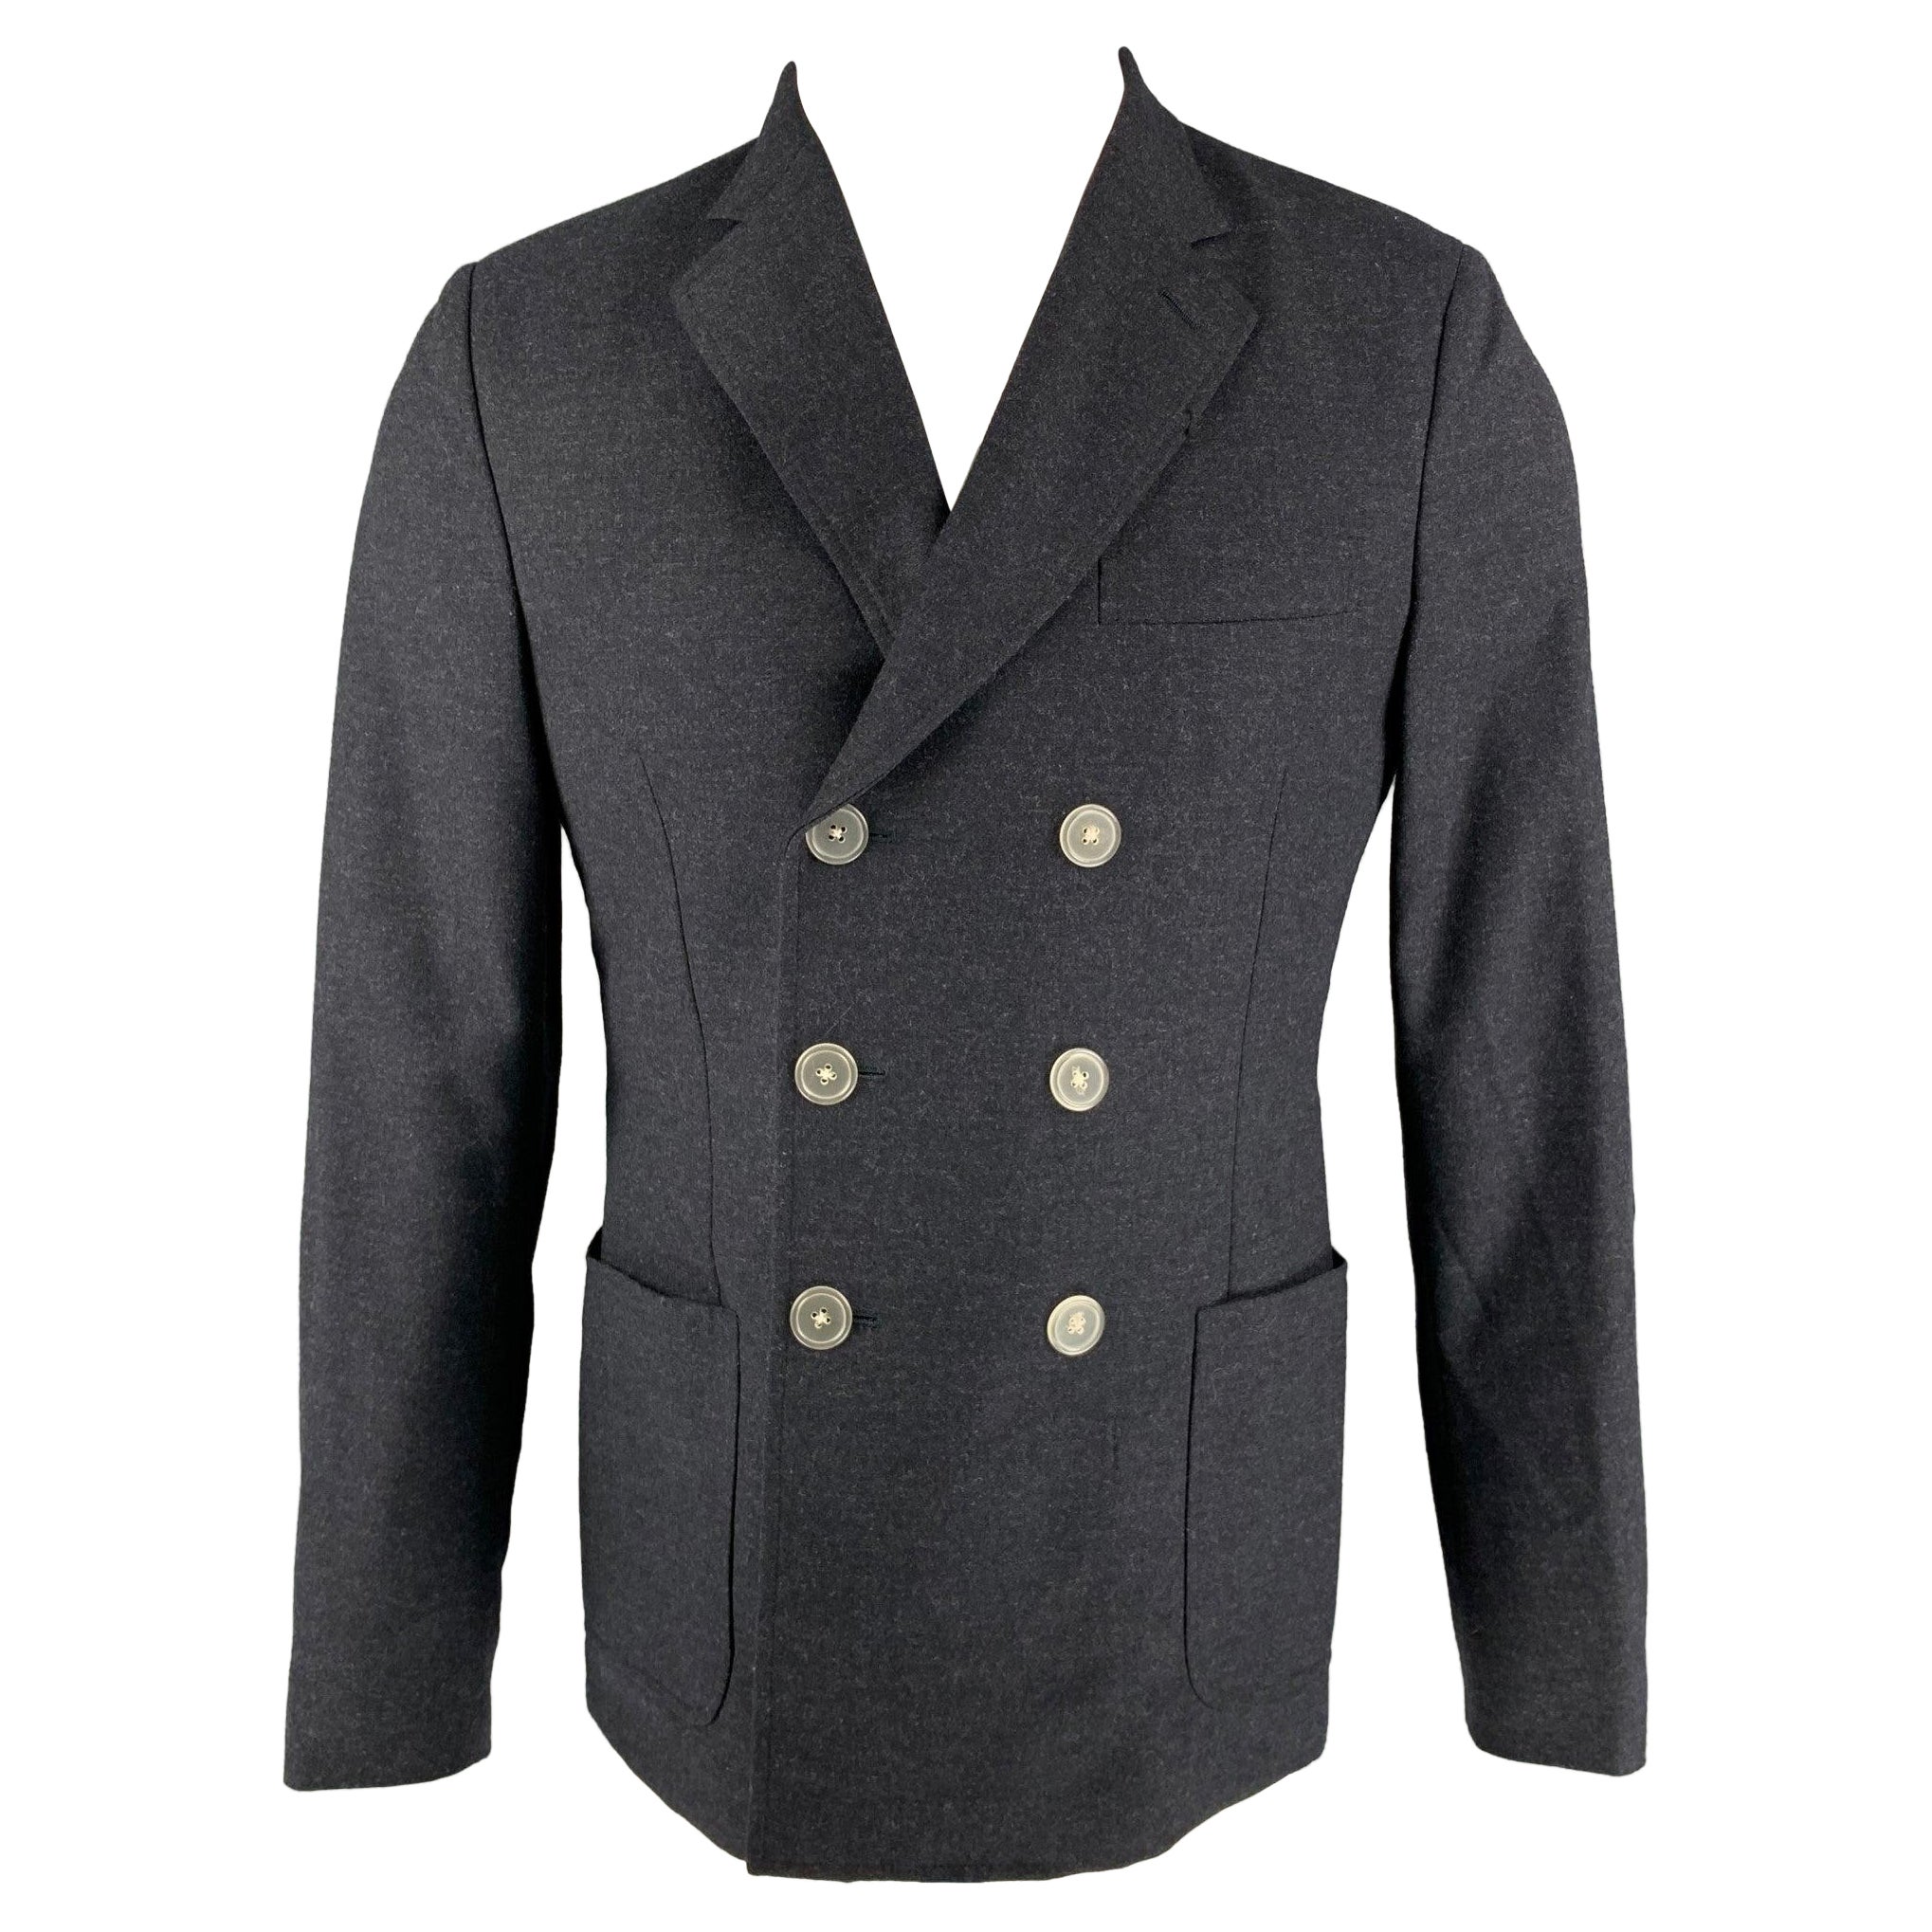 BAND OF OUTSIDERS Size 40 Charcoal Wool Double Breasted Sport Coat For Sale